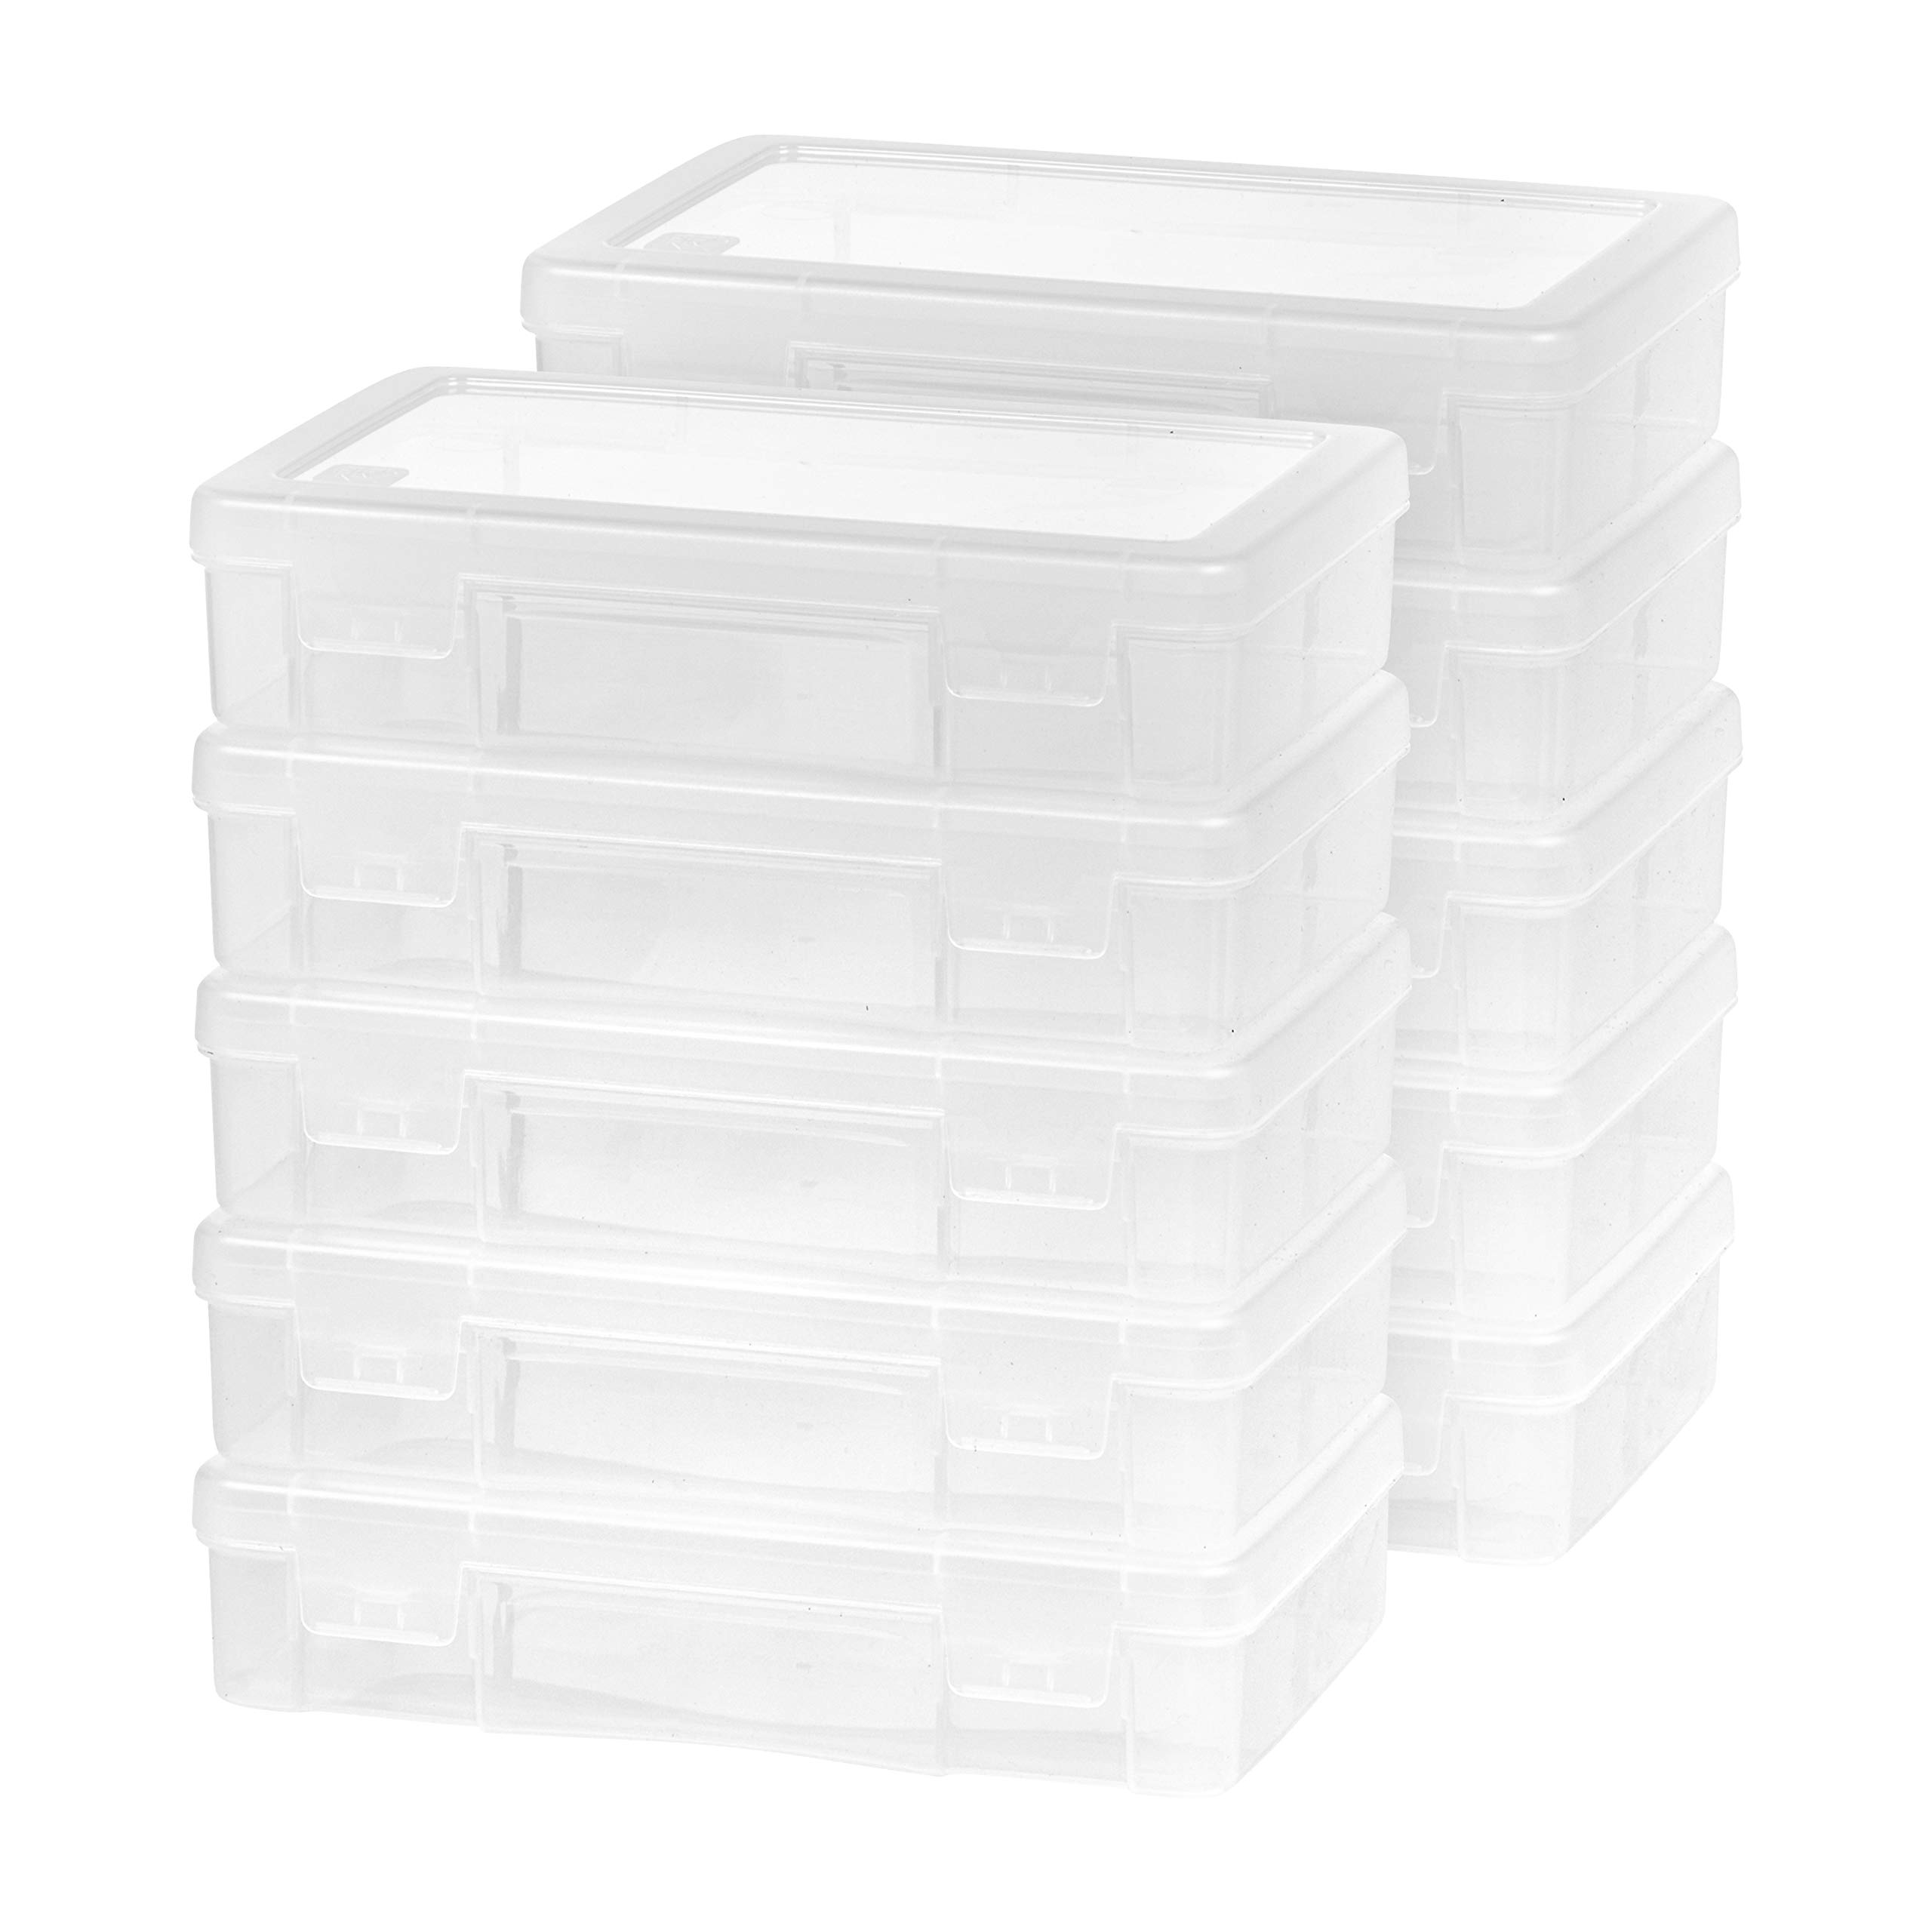 IRIS USA 10 Pack Medium Plastic Hobby Art Craft Supply Organizer Storage Containers with Latching Lid, for Pencil, Lego, Crayon, Ribbons, Wahi Tape, Beads, Sticker, Yarn, Ornaments, Stackable, Clear